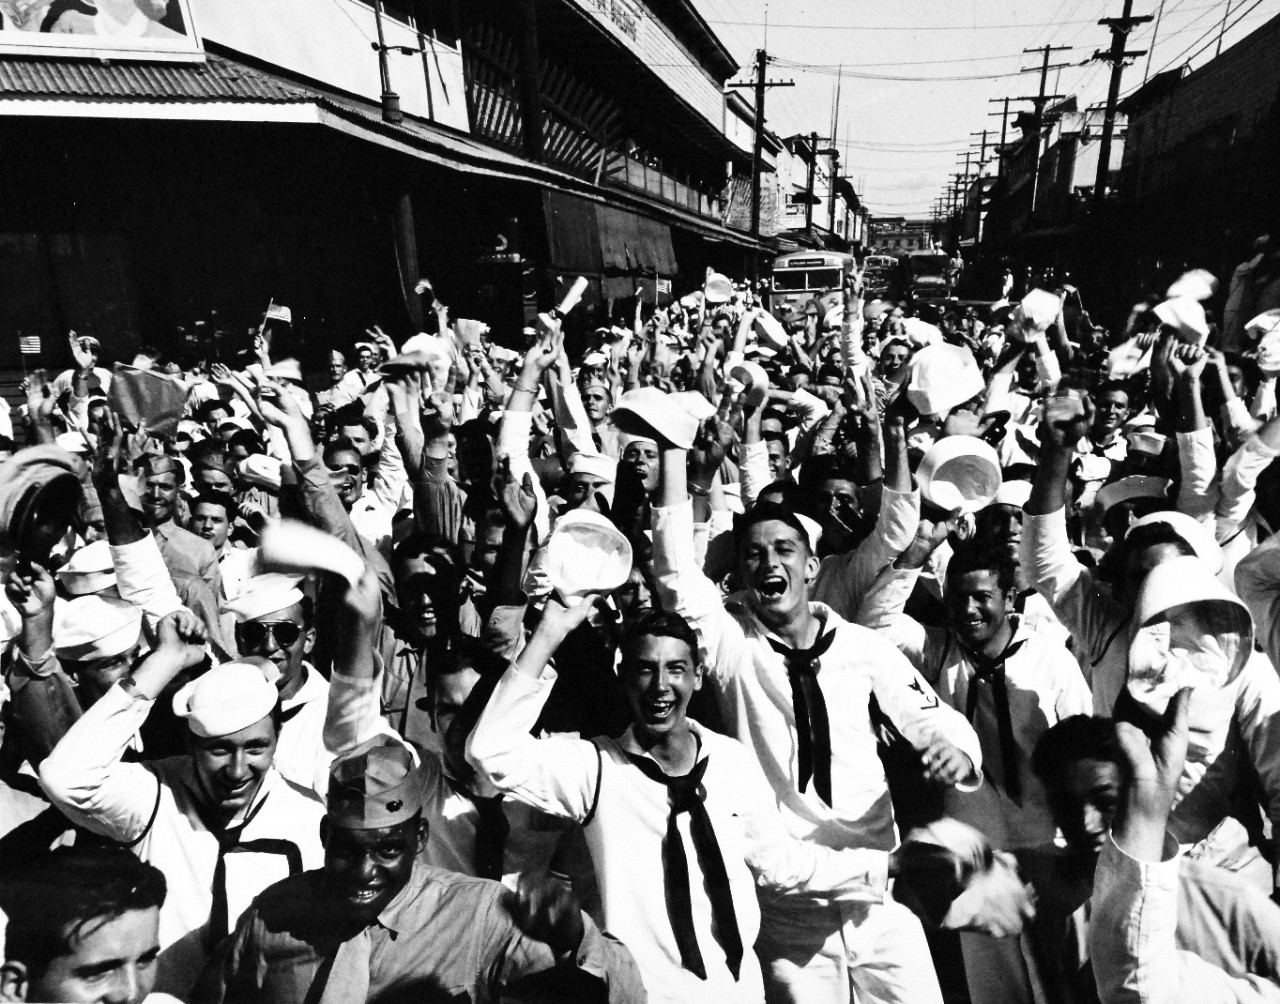 80-G-332789 V-J Day, August 15, 1945.    Scenes at Waikiki, Oahu, Territory of Hawaii, when word was received that the Japanese had accepted the Potsdam surrender terms, August 15, 1945.  Official U.S. Navy photograph, now in the collections of the National Archives. (2015/11/17).   Note, original photograph is extremely curved.  